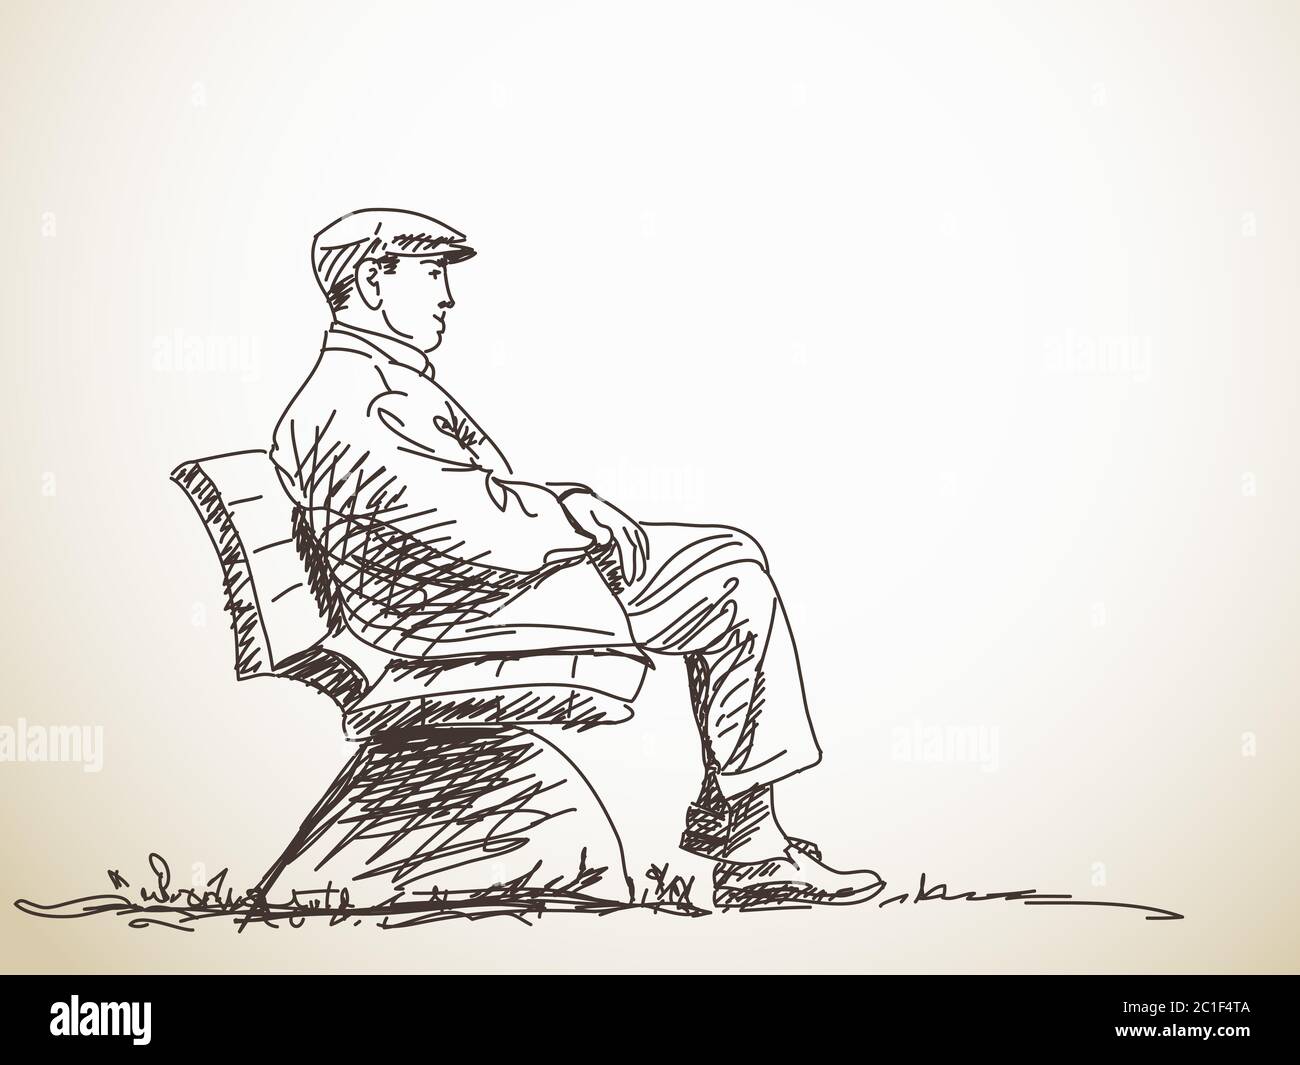 Sketch of a sitting man in profile Drawing by Alla Tkachuk  Saatchi Art